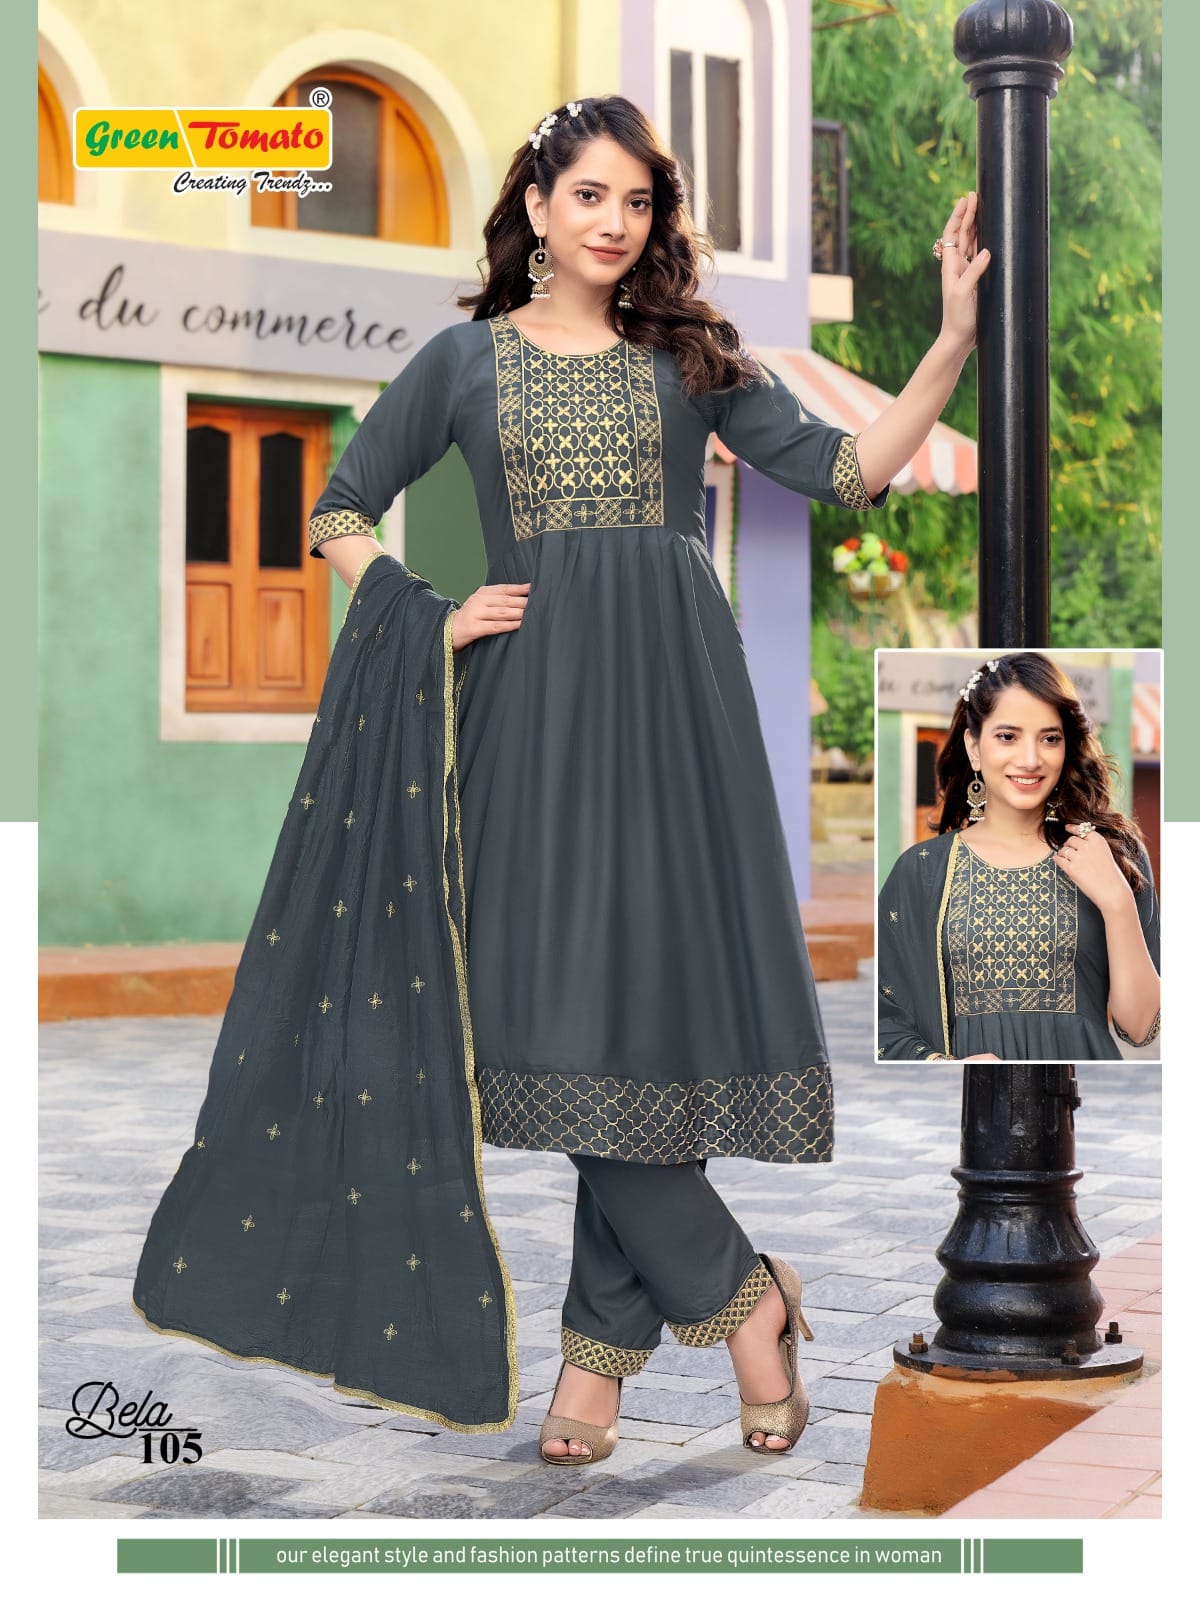 Bela Green Tomato Rayon Readymade Pant Style Suits